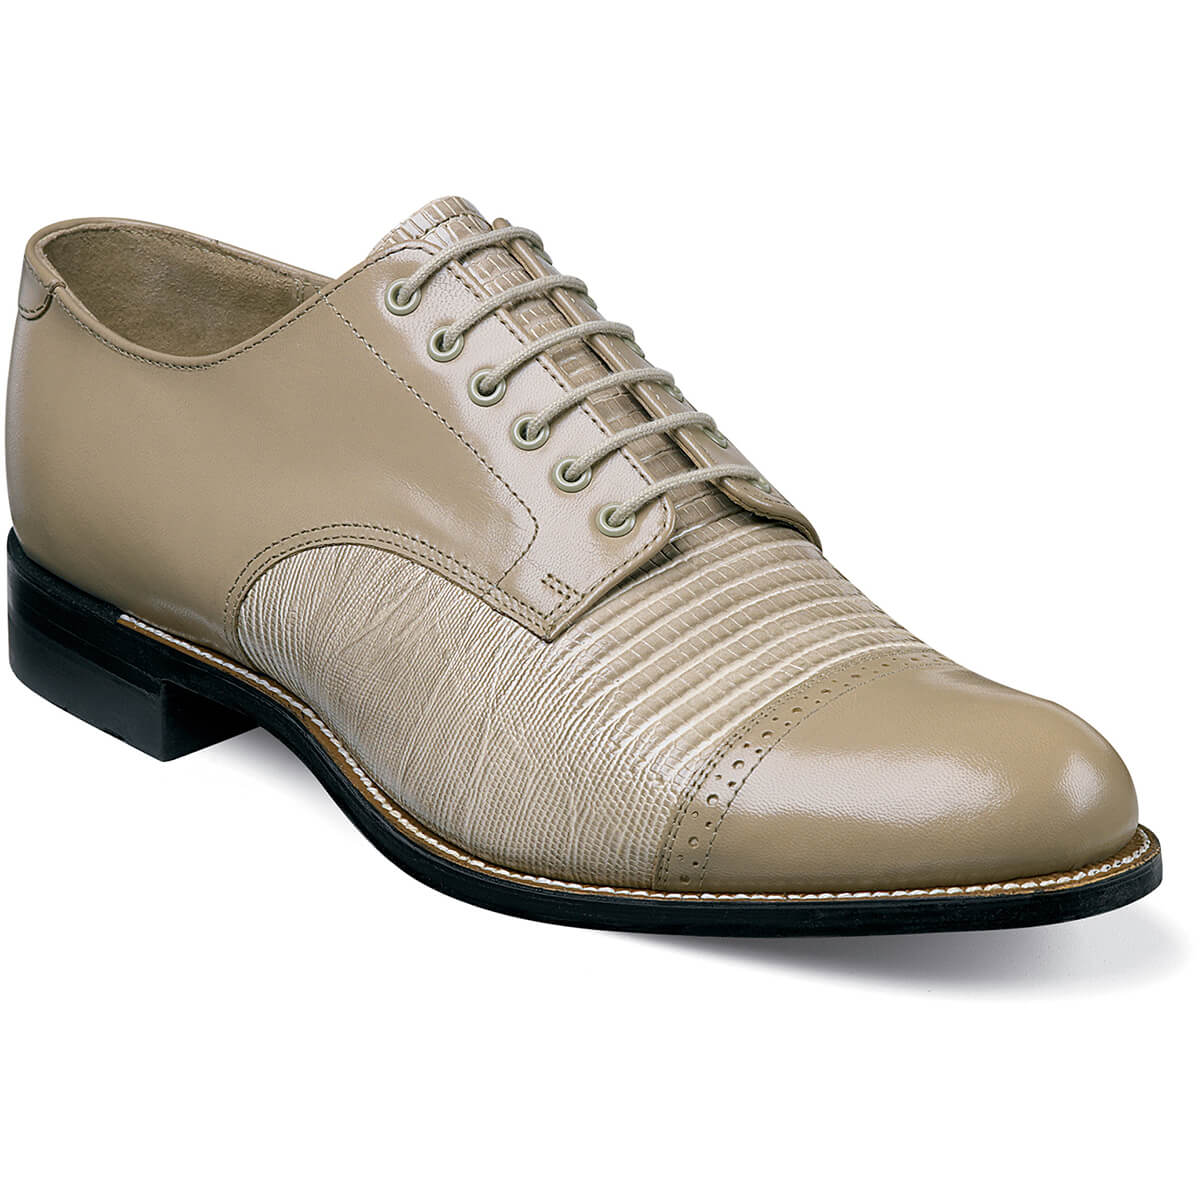 Men's Dress Shoes | Taupe Lizard Cap Toe Oxford | Stacy Adams Madison